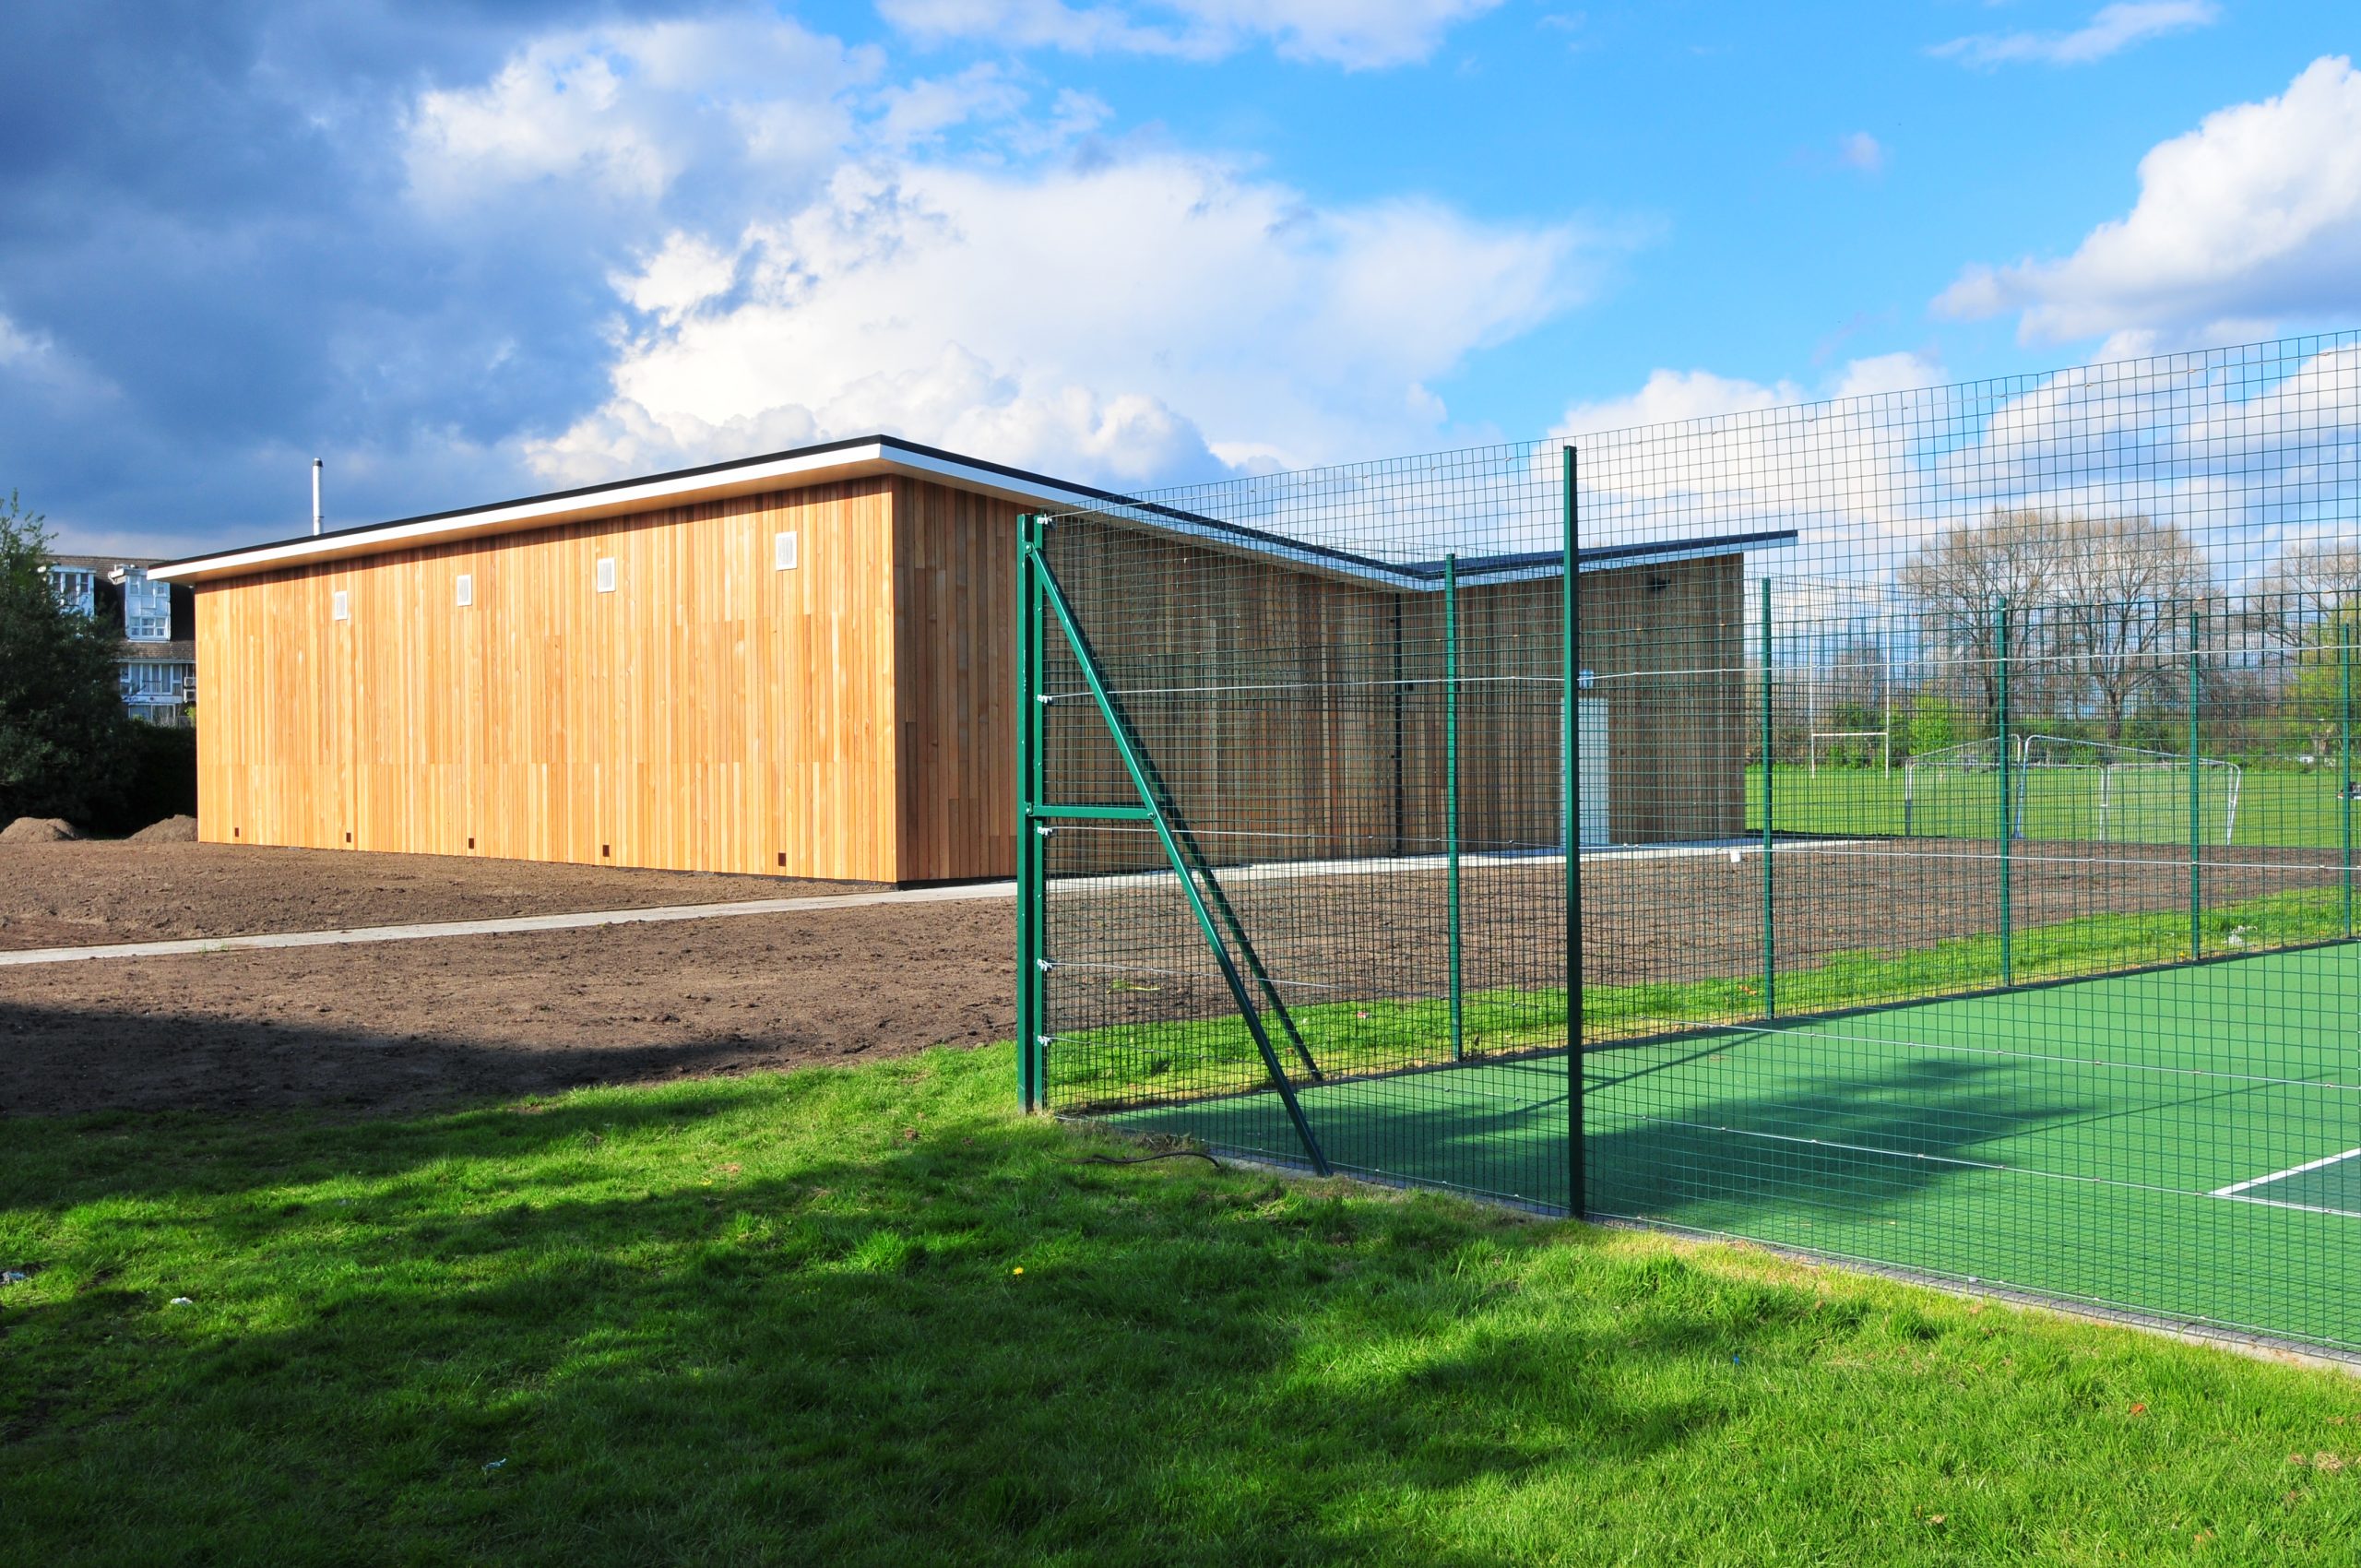 Different Ways To Use Modular Buildings In The Sport And Leisure Sector